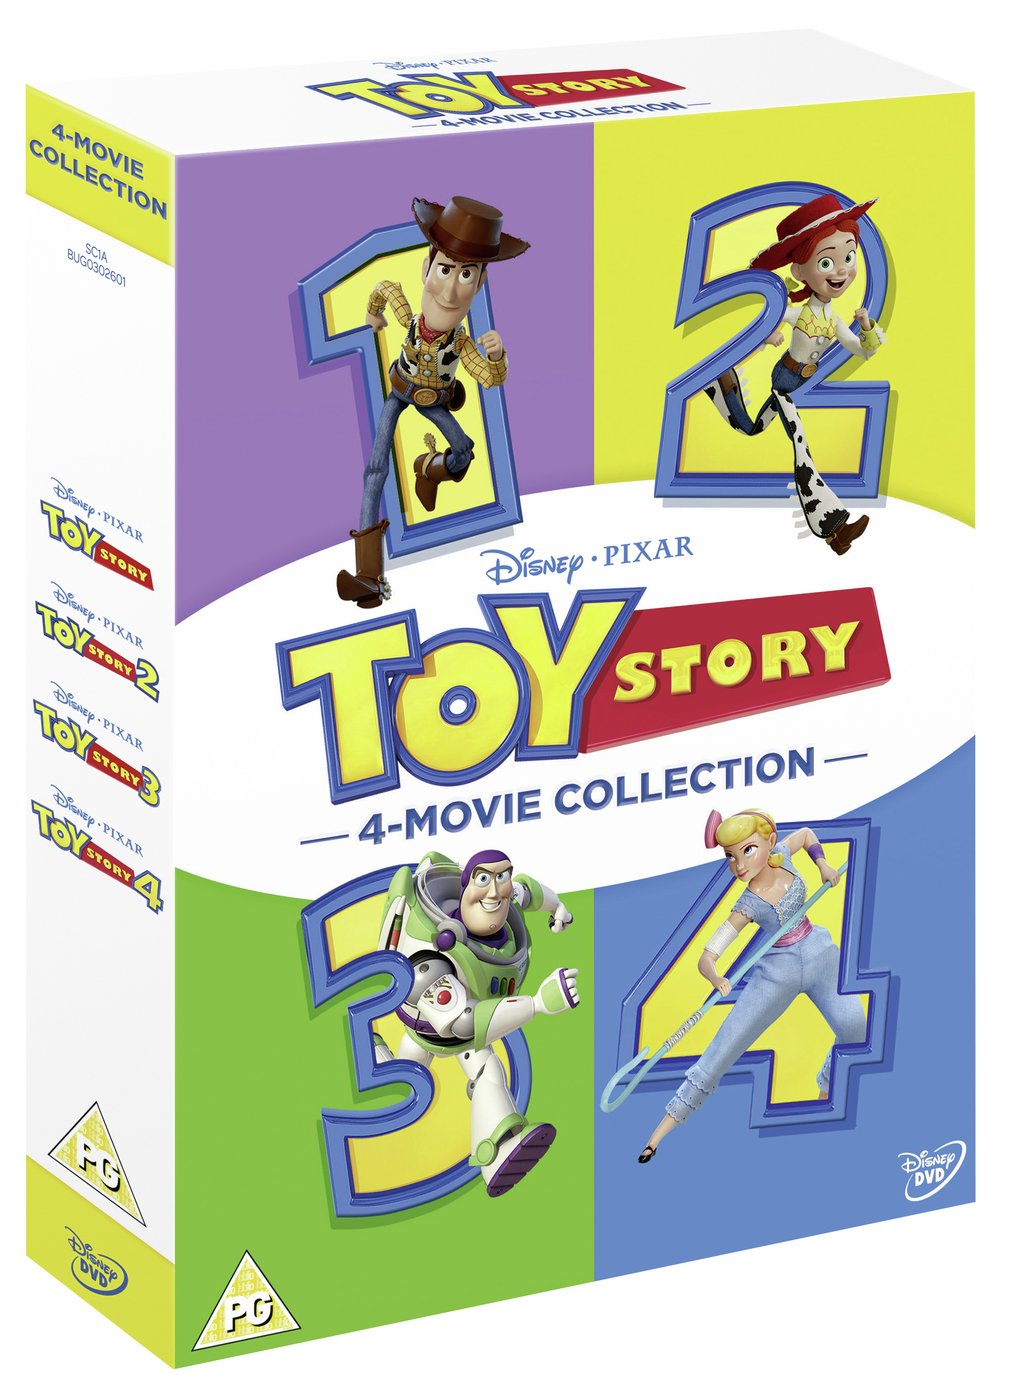 Toy Story 1-4 Complete DVD Box Set